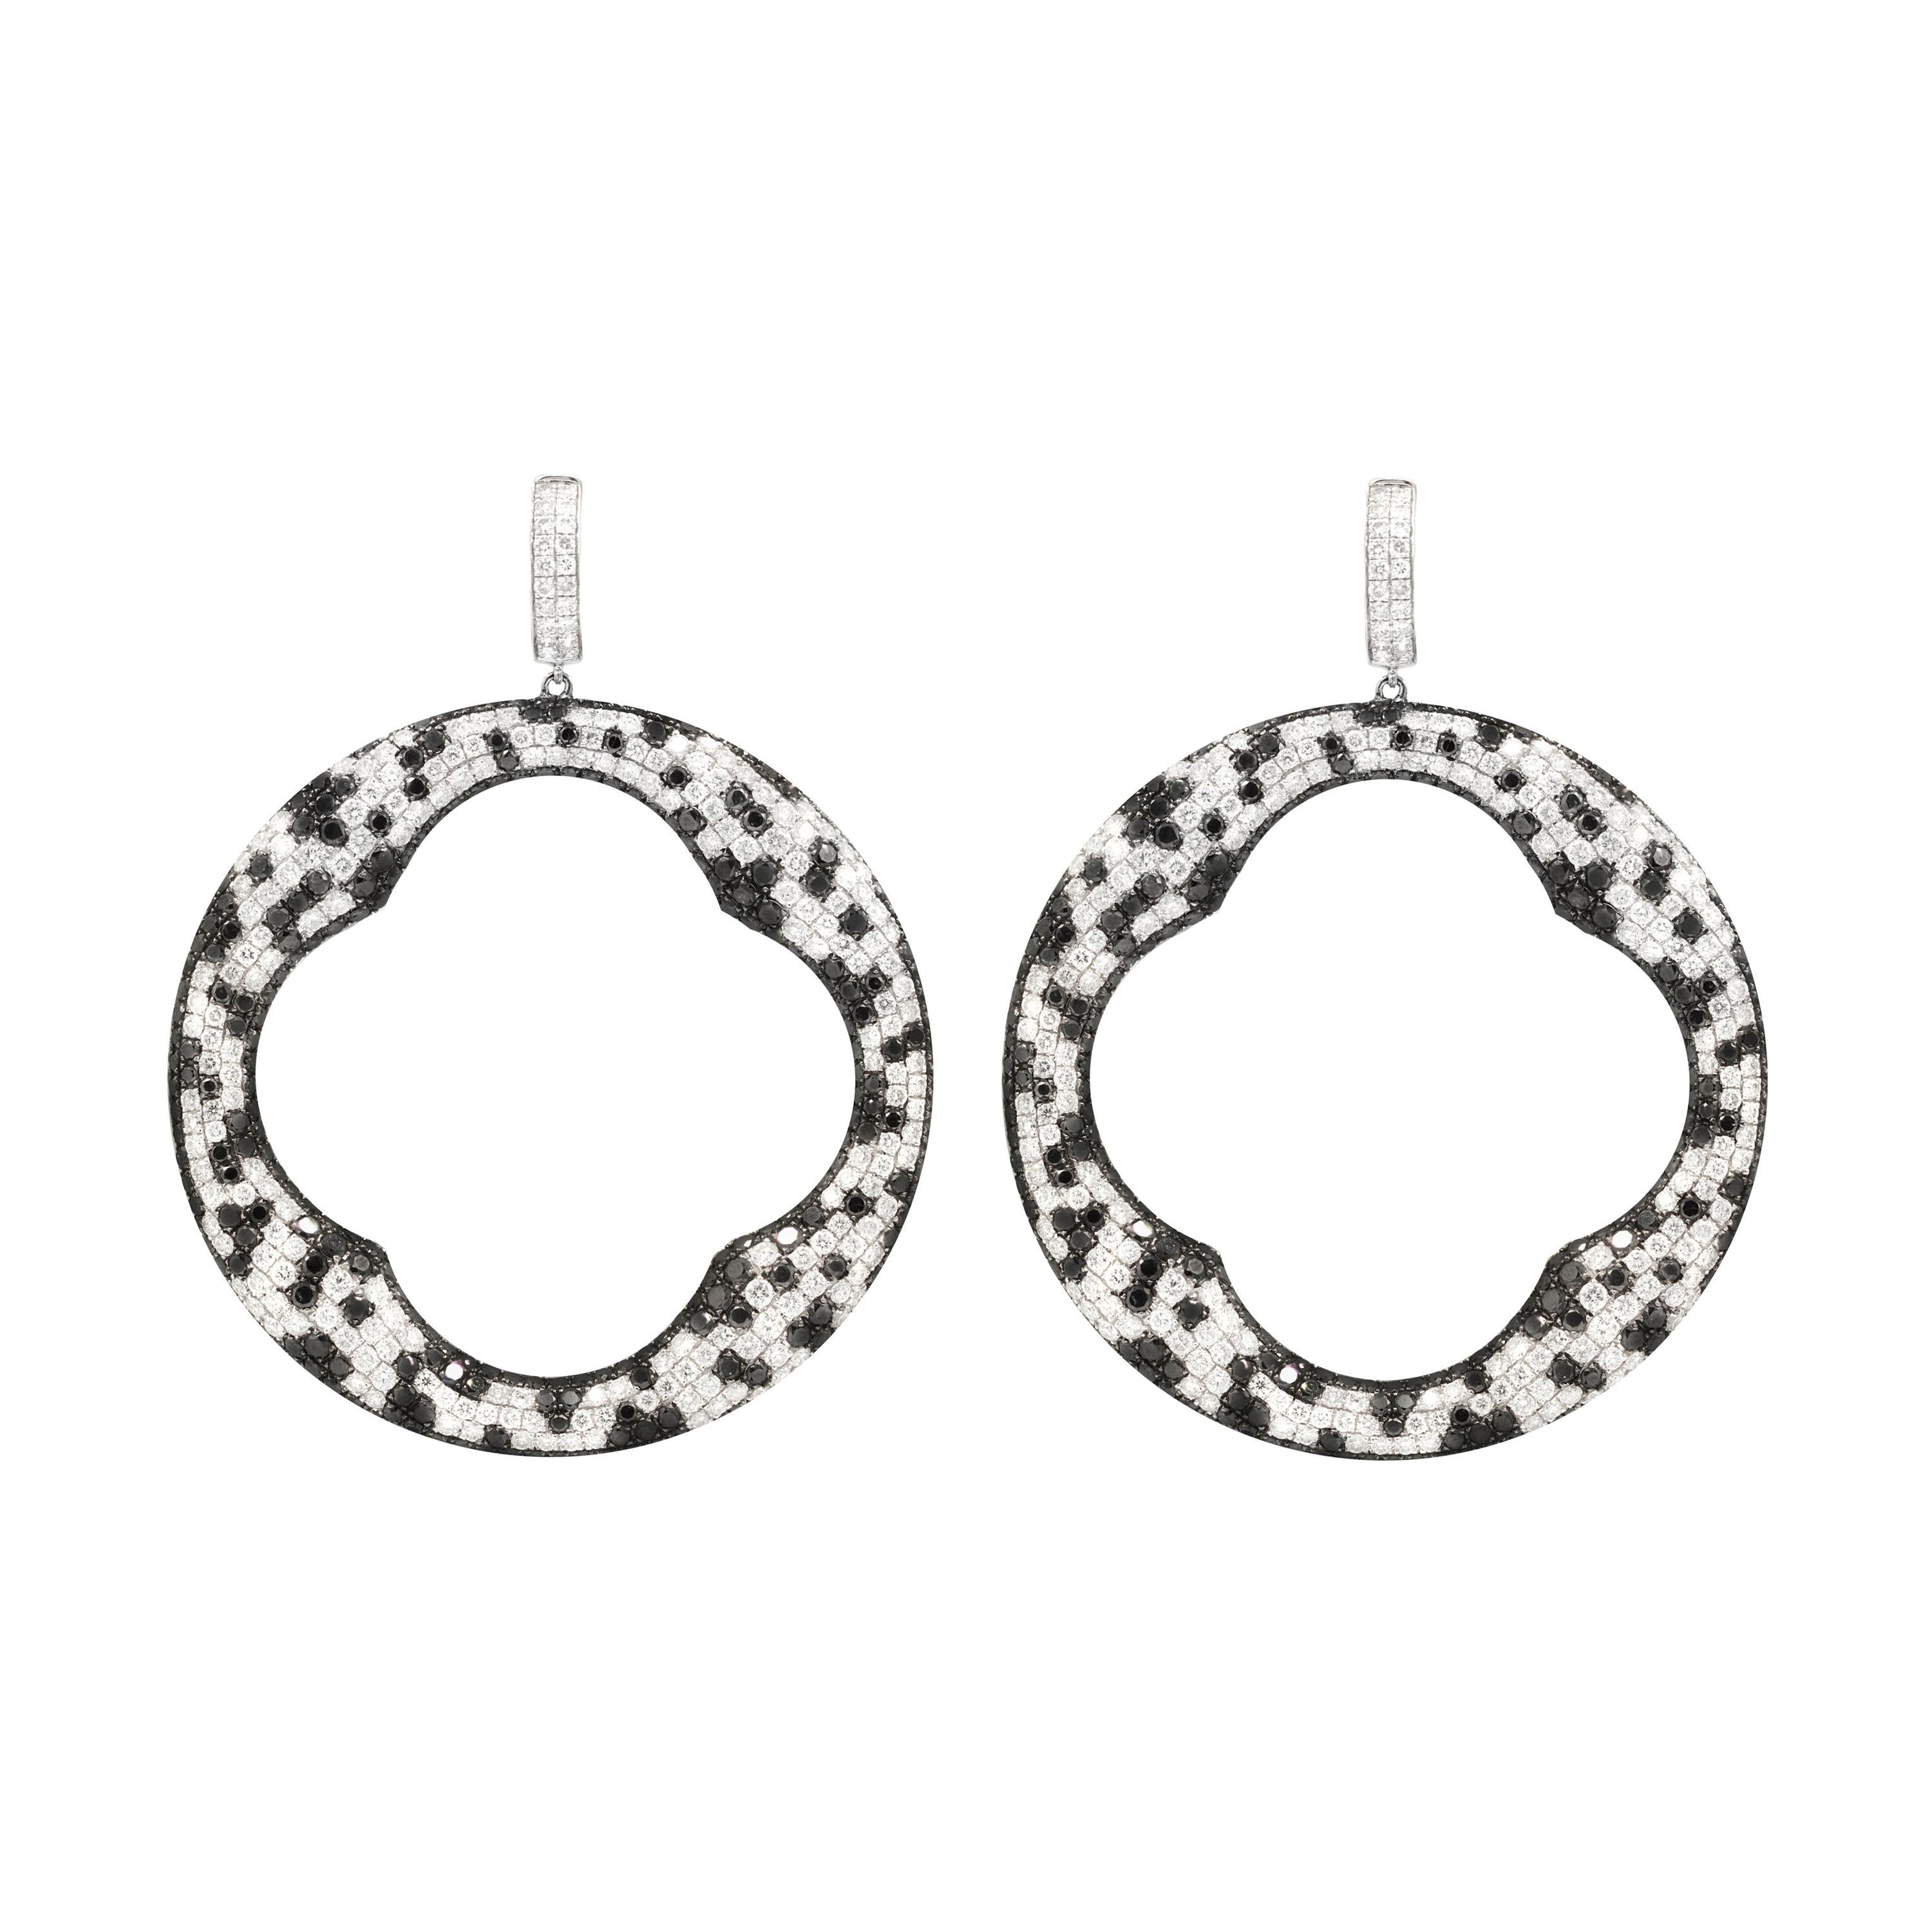 18kt White Gold Fashion Earrings with Black and White Diamond